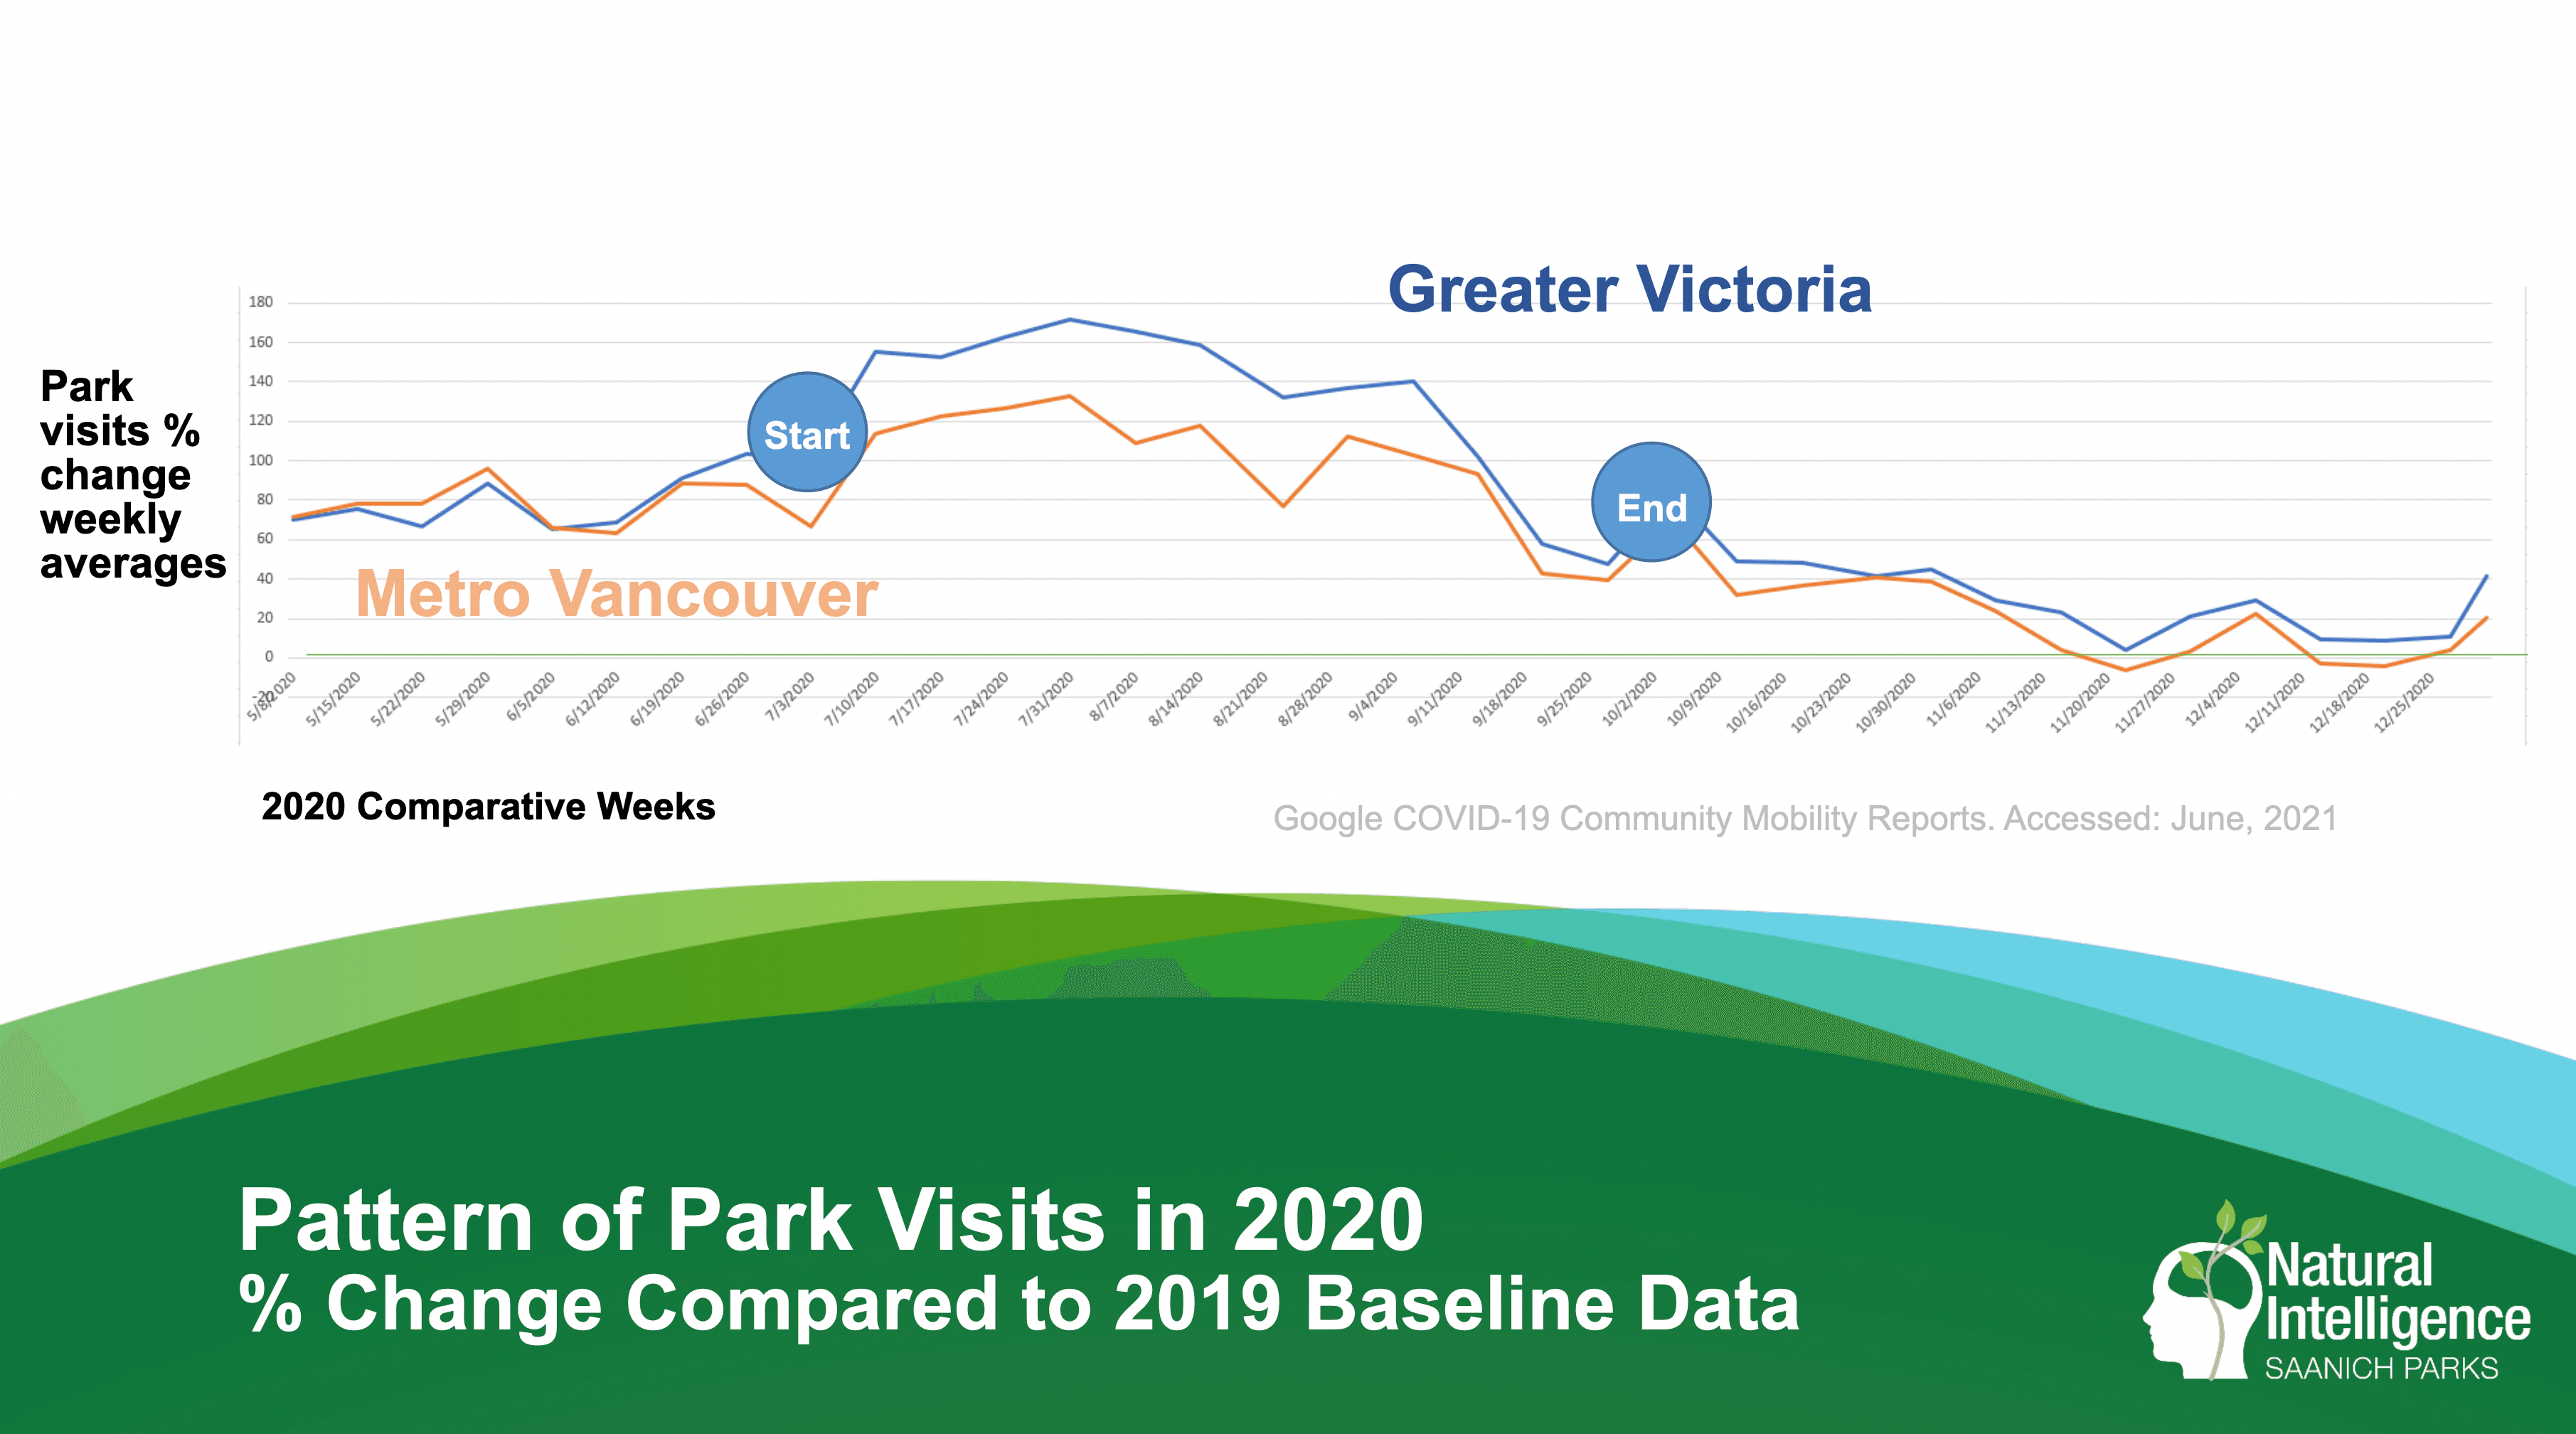 Results from the "Less Screen Time More Green Time" campaign ran by Natural Intelligence, Saanich Parks